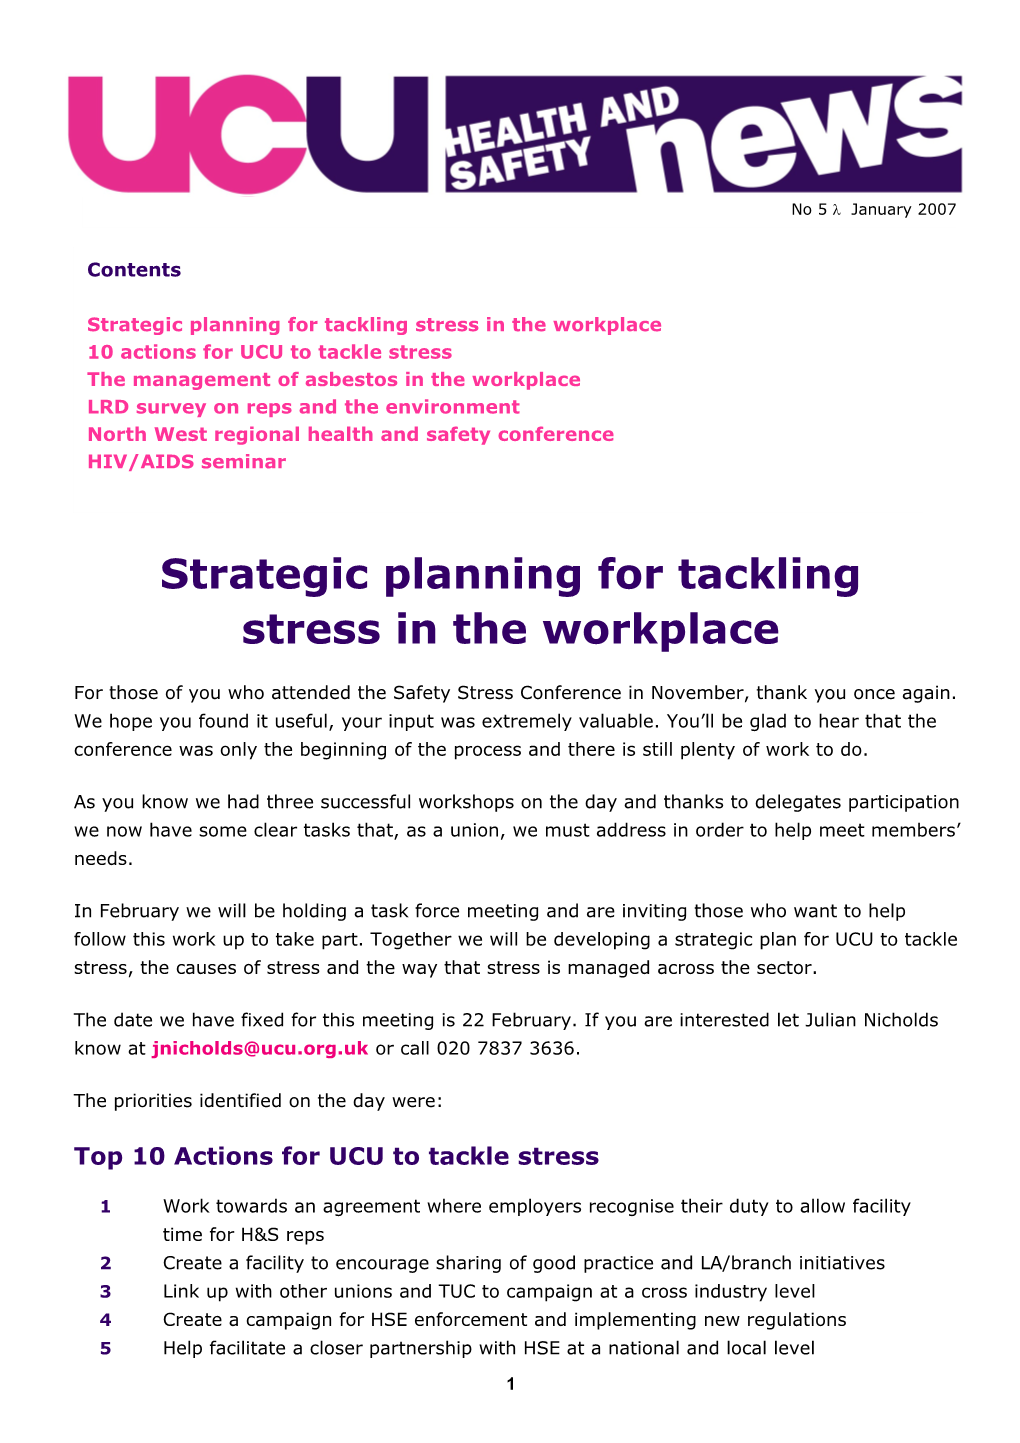 Strategic Planning for Tackling Stress in the Workplace